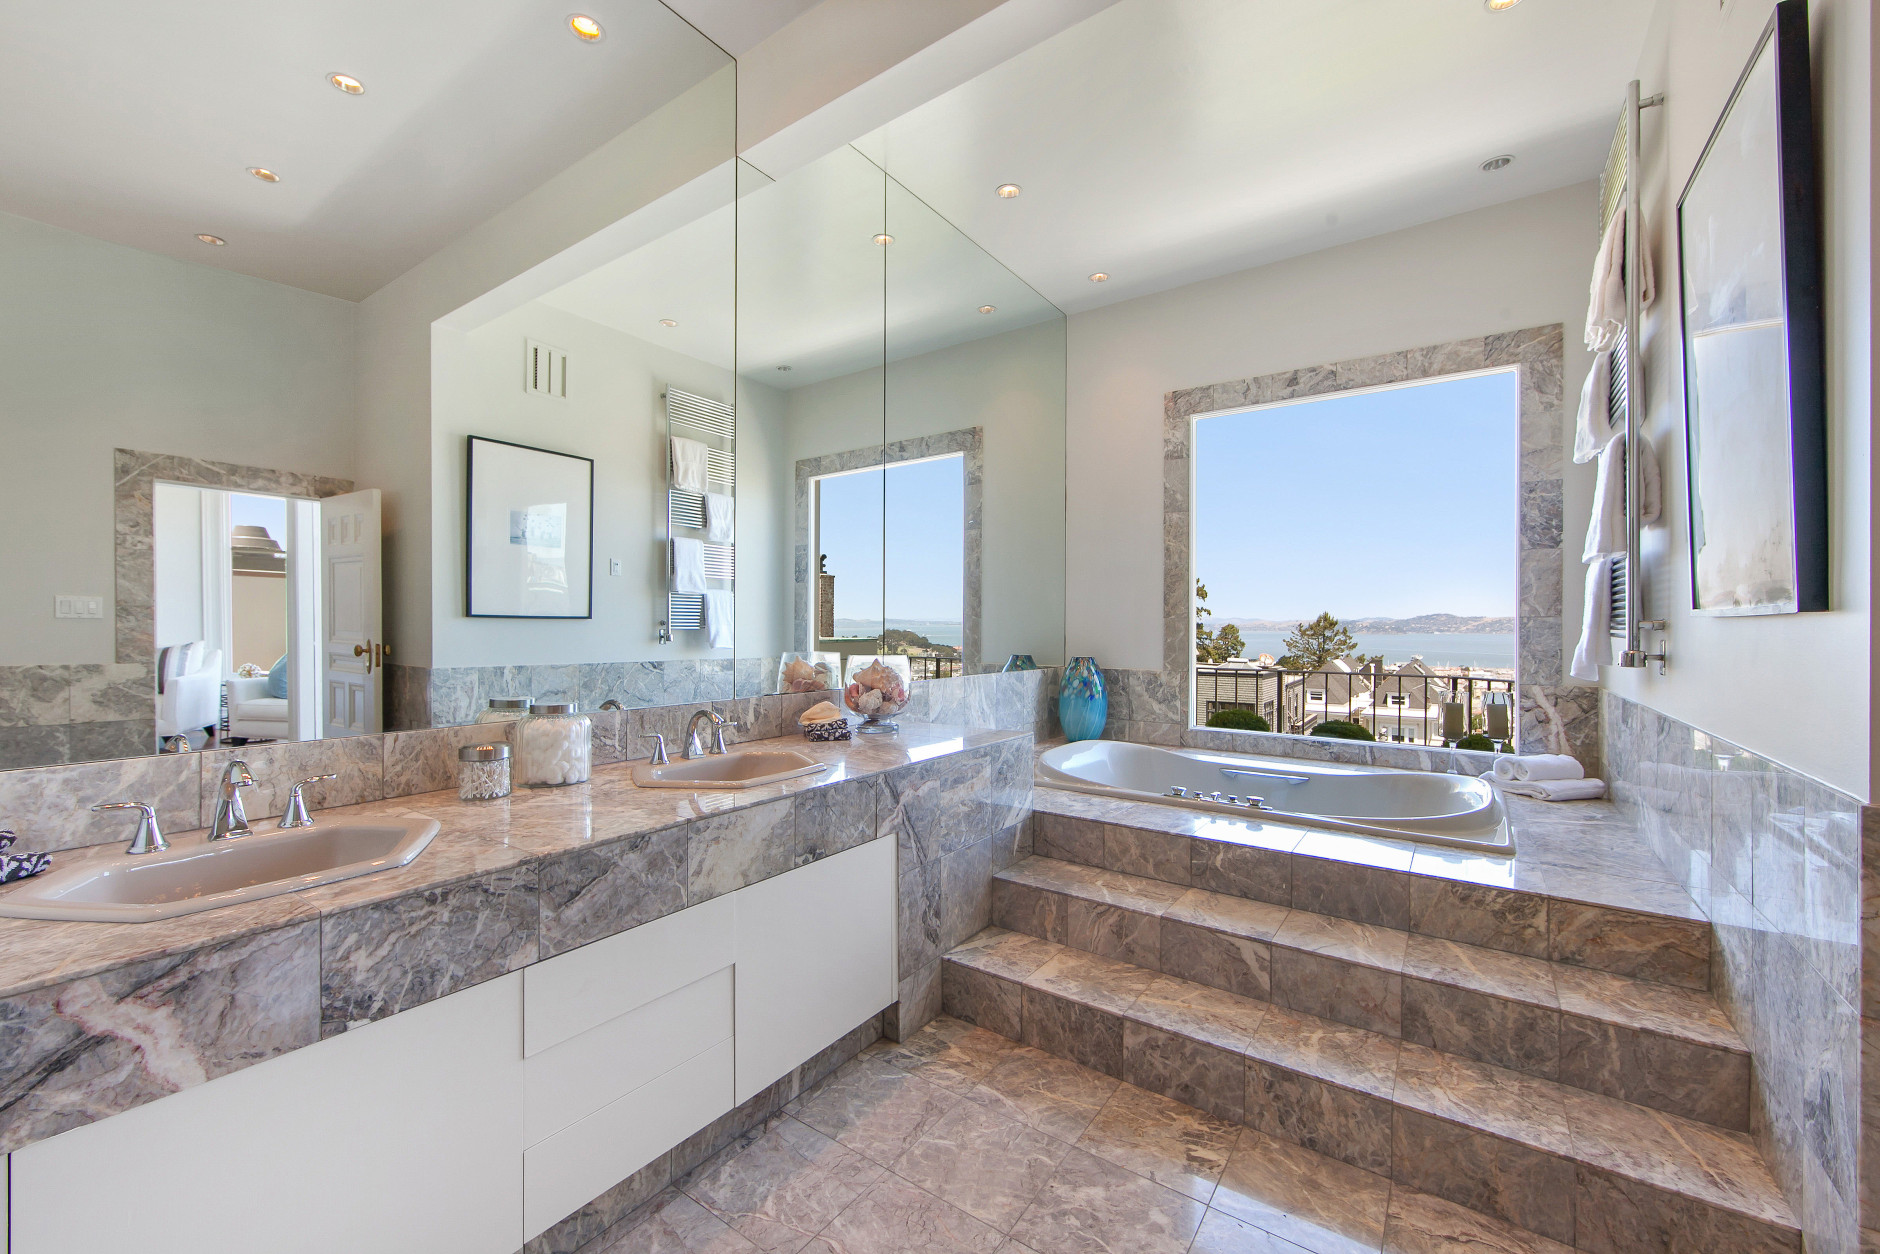 There are seven bathrooms in the house. (Jason Wakefield/TopTenRealEstate)